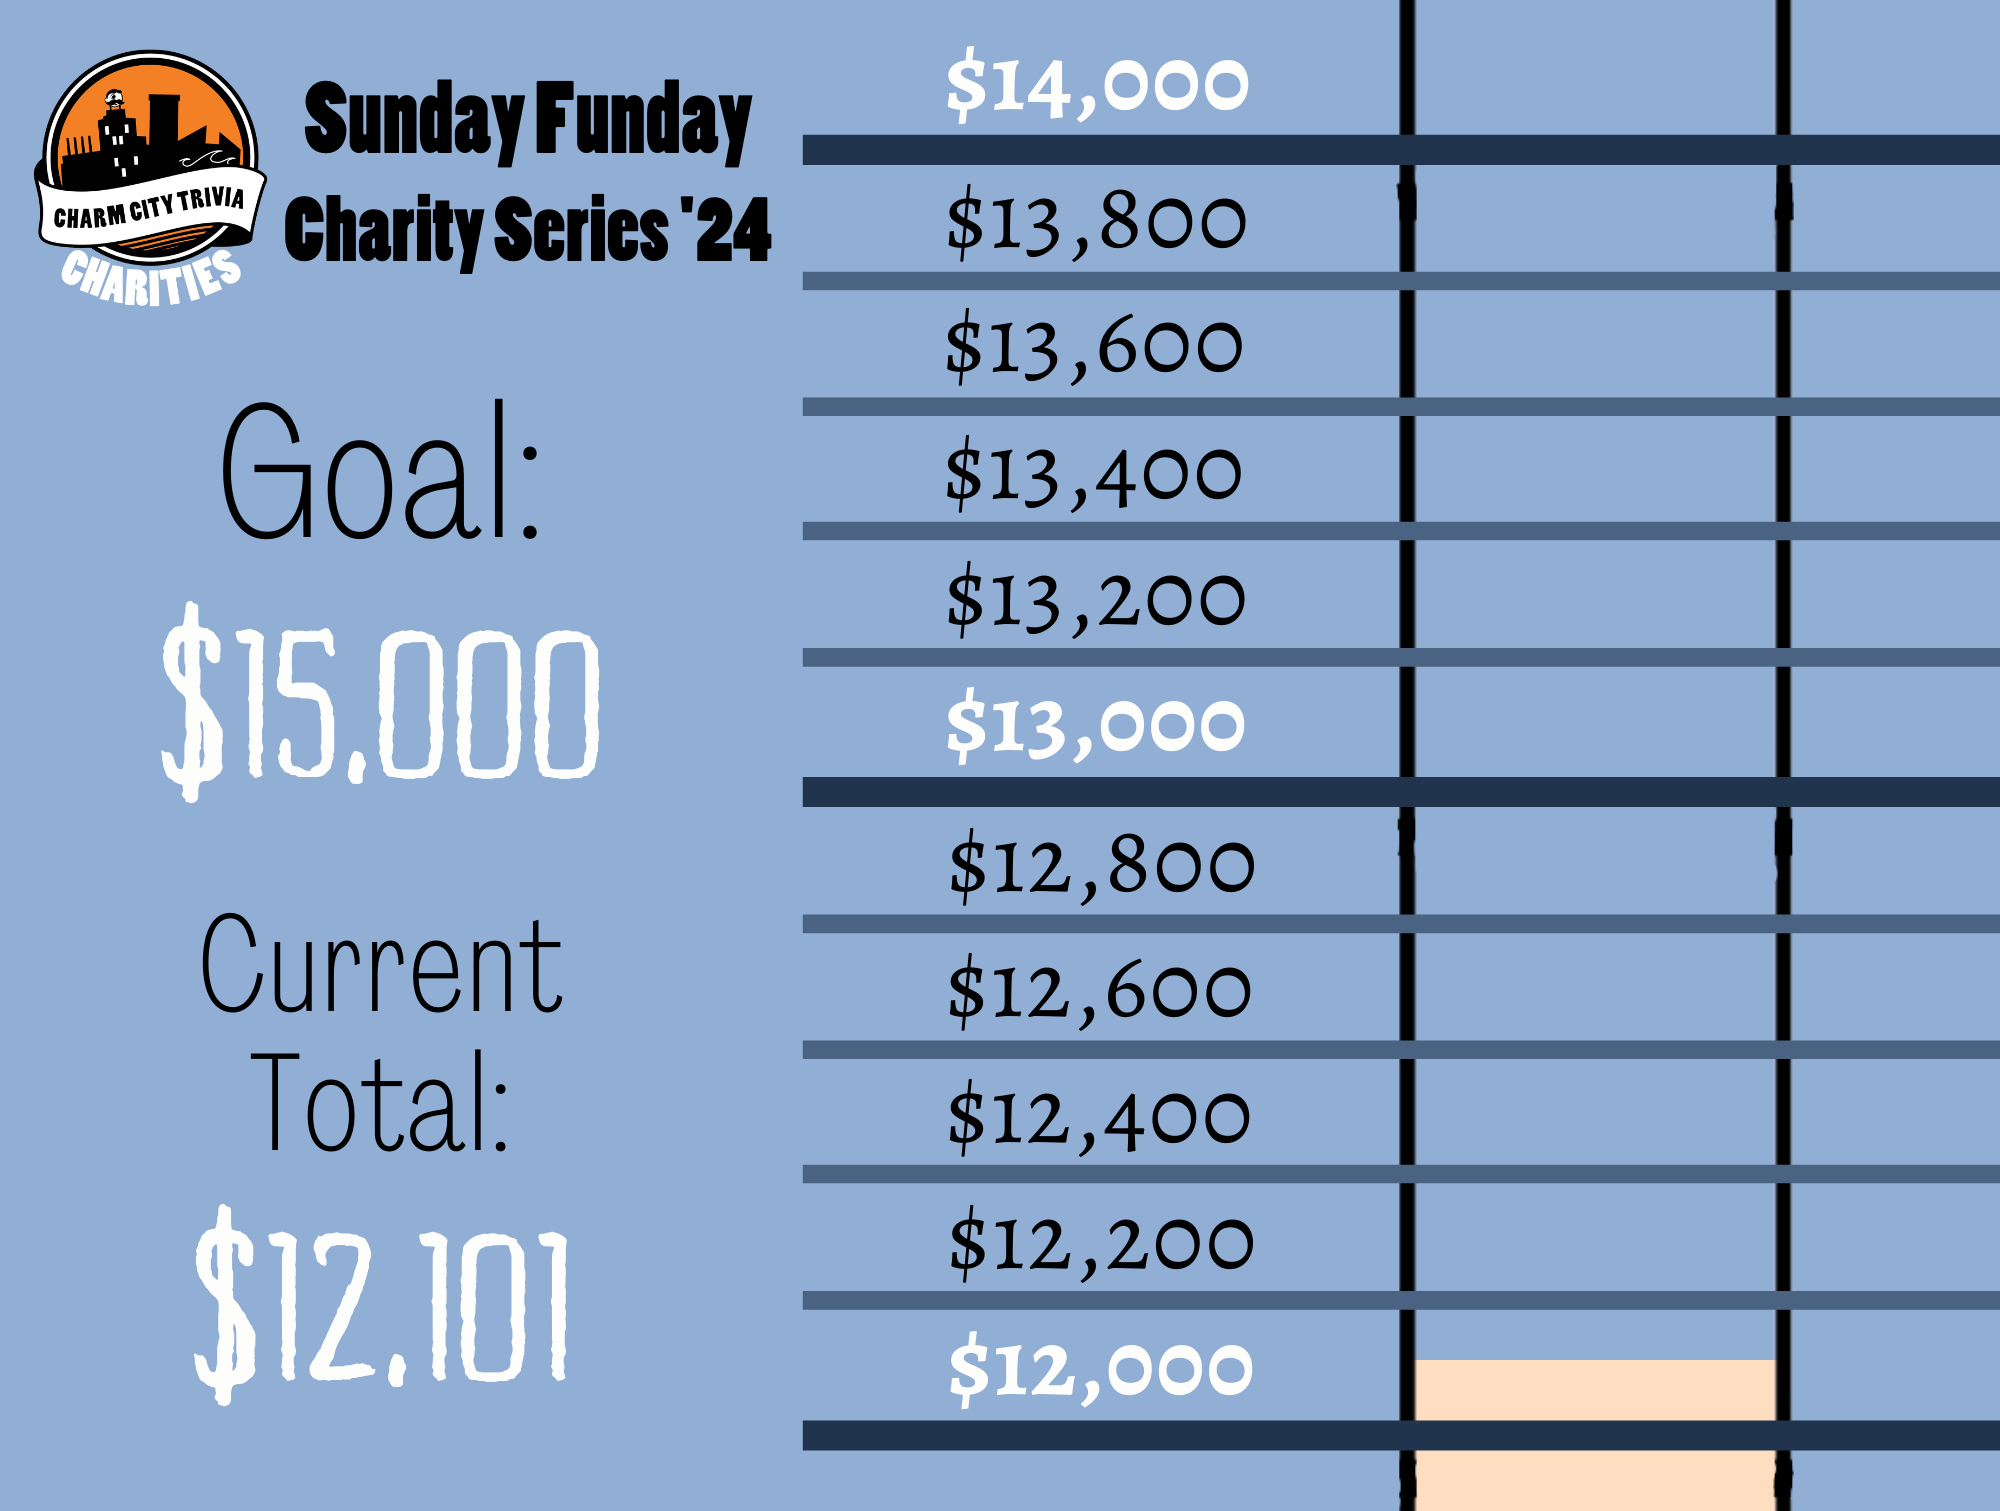 a light blue background with a section of the thermometer, blue lines separating the thermometer into donation milestones by 200s from $10,000 to $12,000, the Charm City Trivia Charities logo, a very light orange bar inside the thermometer that goes from the bottom of the image to between the line that reads $12,000 and the line that reads $12,200, and black and white text. The text reads: Sunday Funday Charity Series '24. Goal: $15,000. Current Total: $12,101